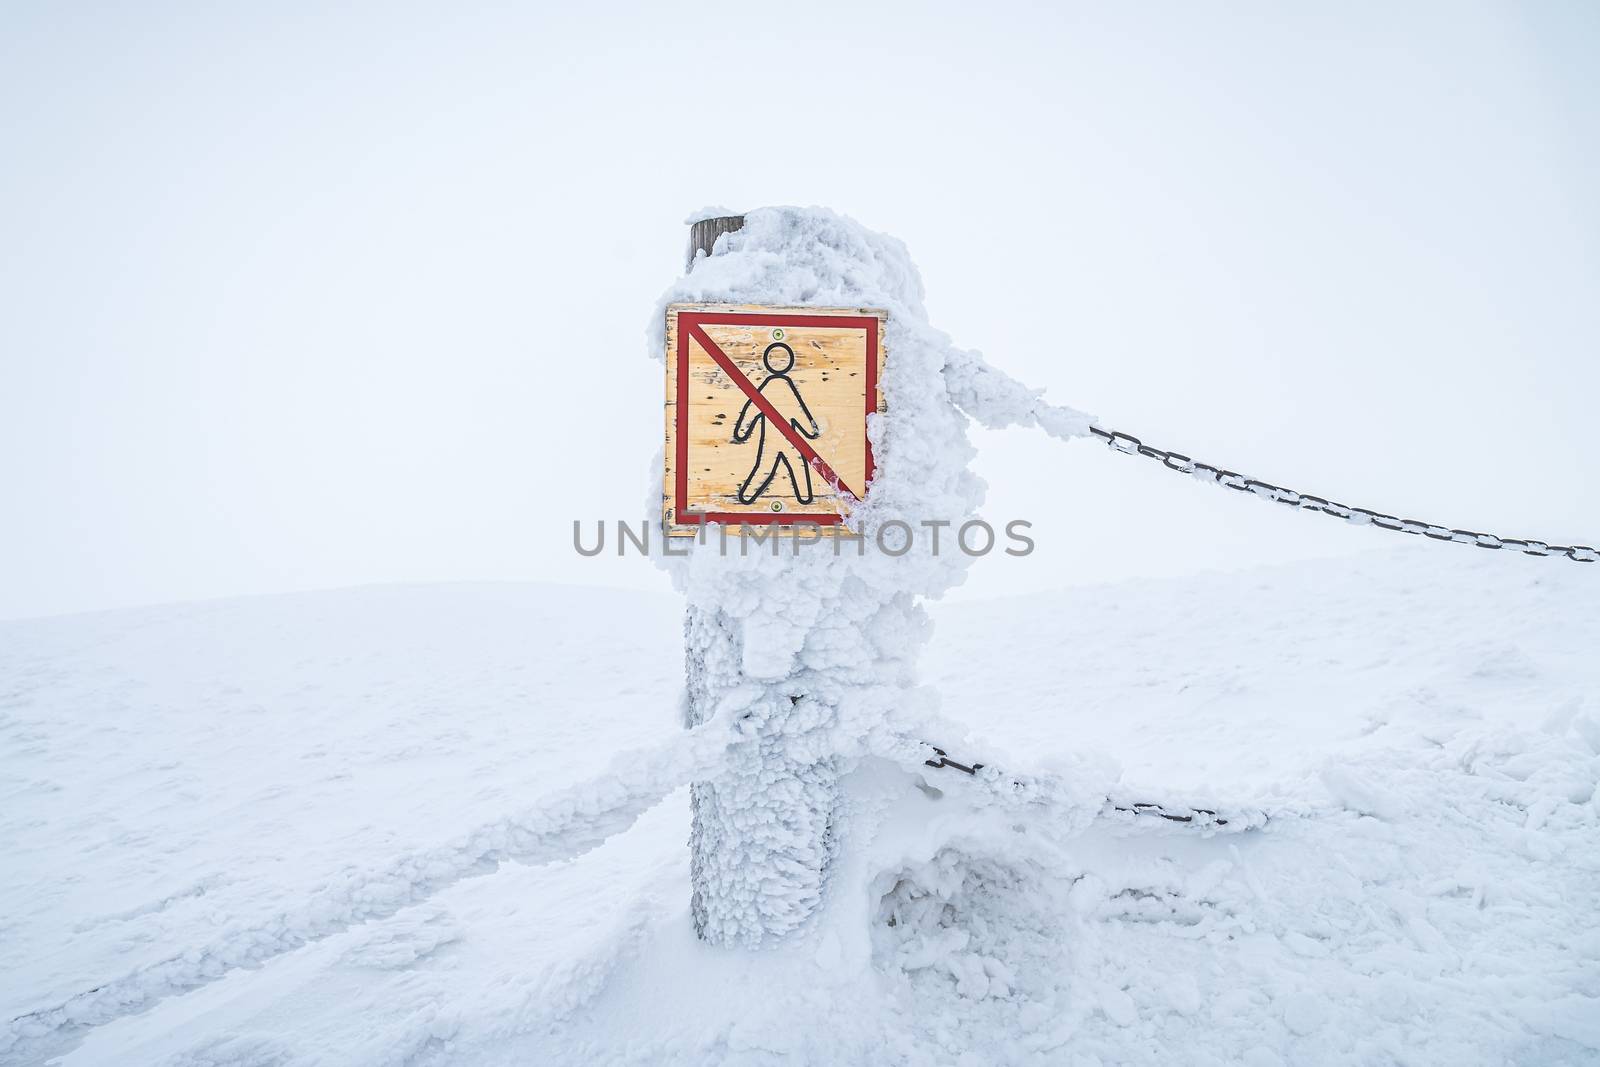 No trespassing sign warning tourists to keep them safe in Krkonose national park. Warning sign covered with snow. by petrsvoboda91